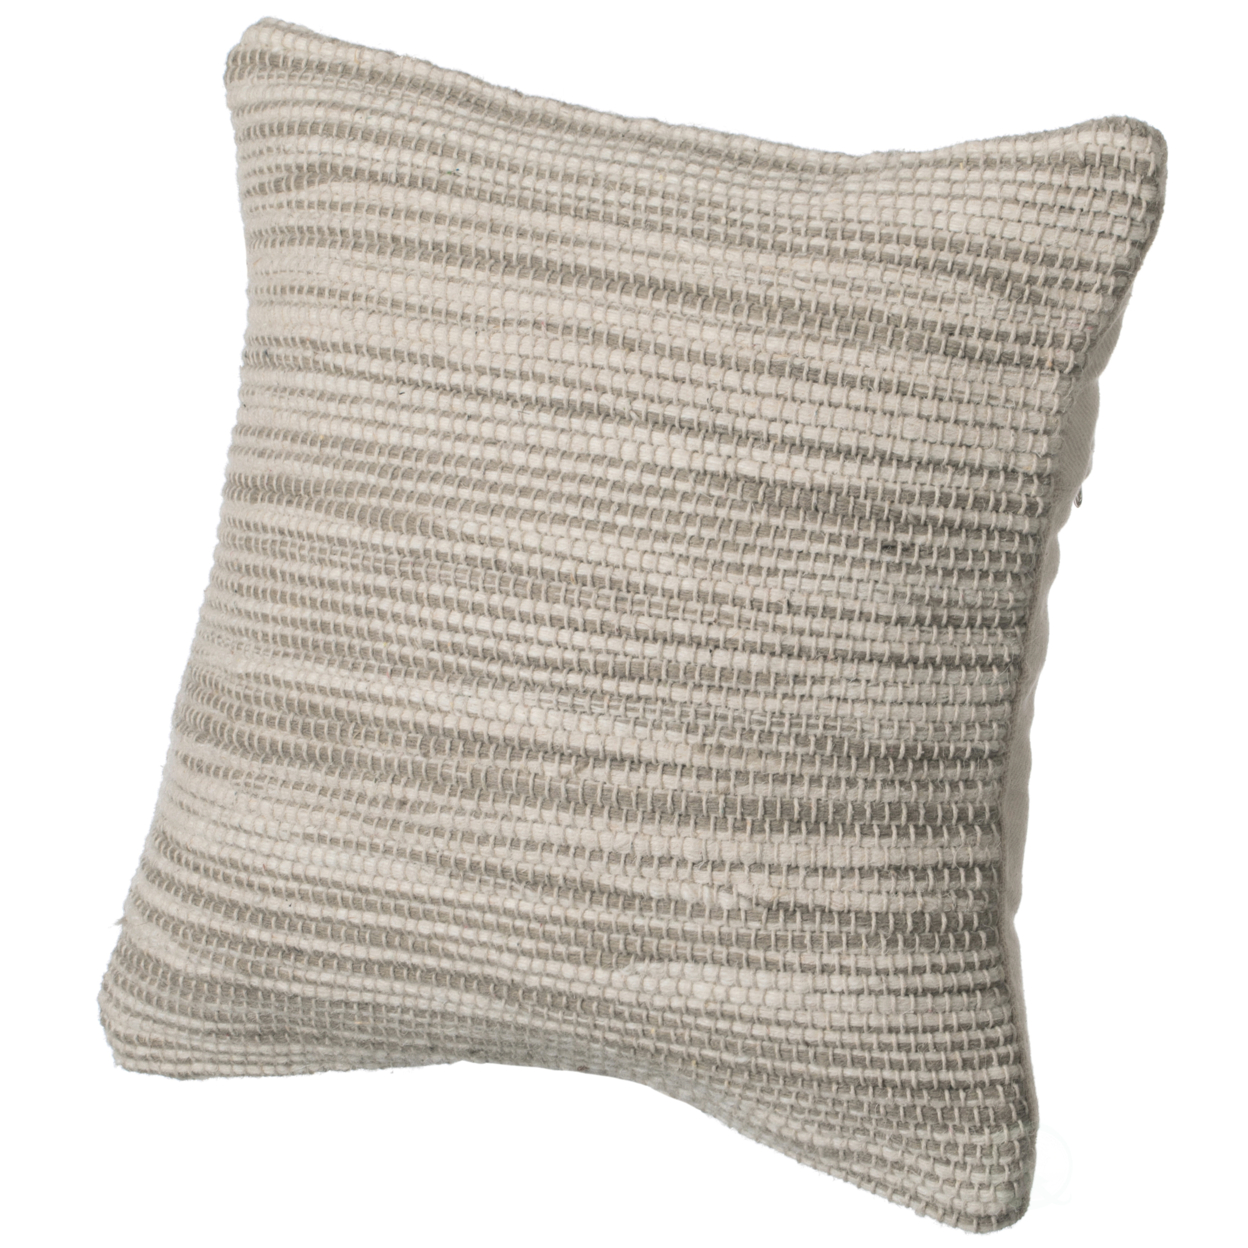 16 Handwoven Wool & Cotton Throw Pillow Cover With Woven Knit Texture - Rust